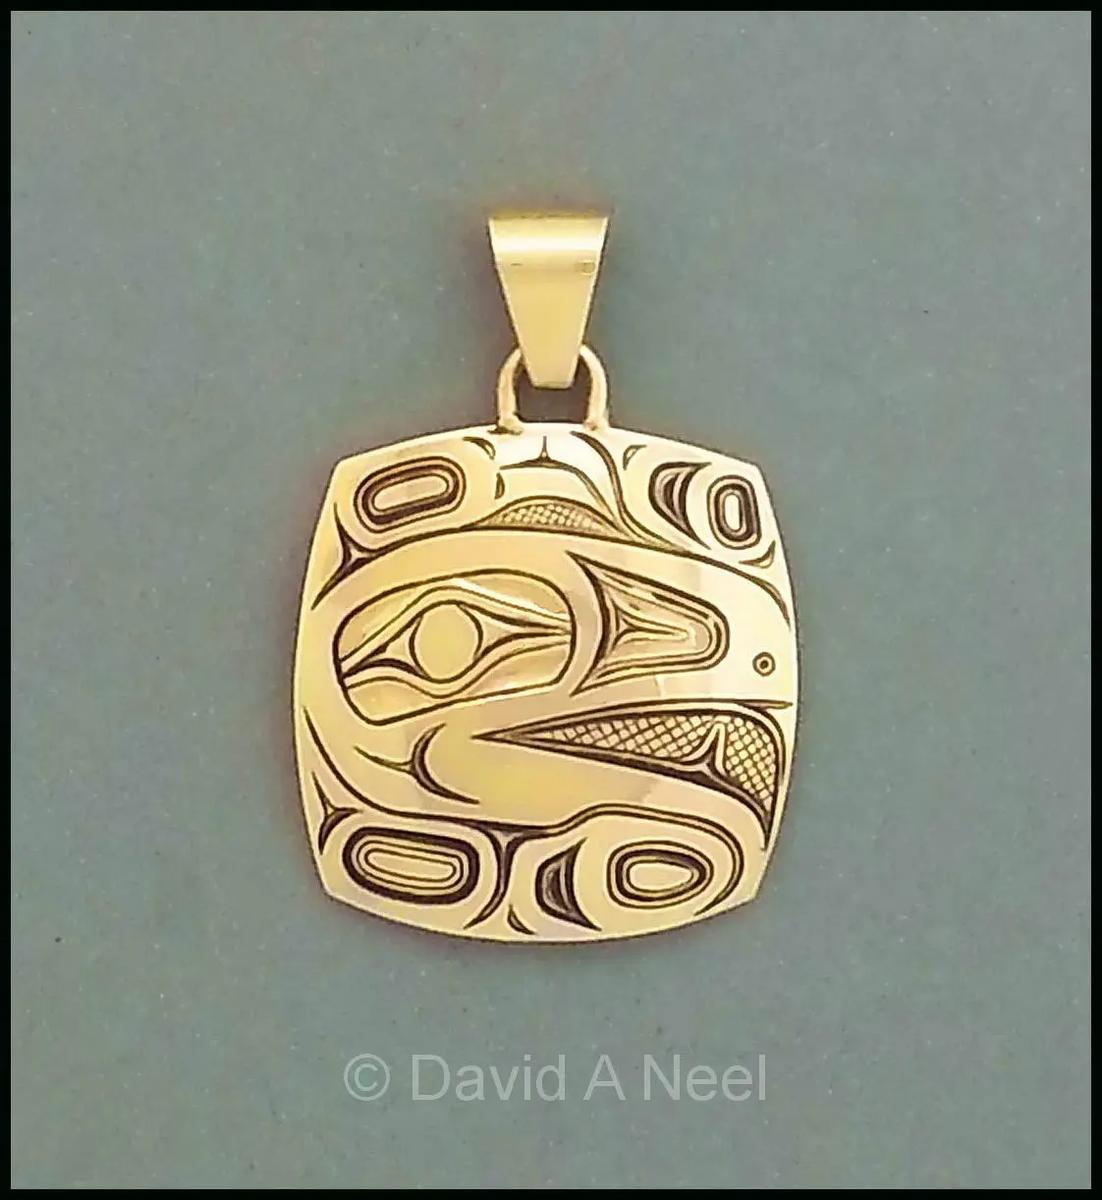 Kwakiutl Salish First Nation 'Grizzly' Pewter Pendant Necklace Pacific North West Coast Native Indigenous Art Jewelry